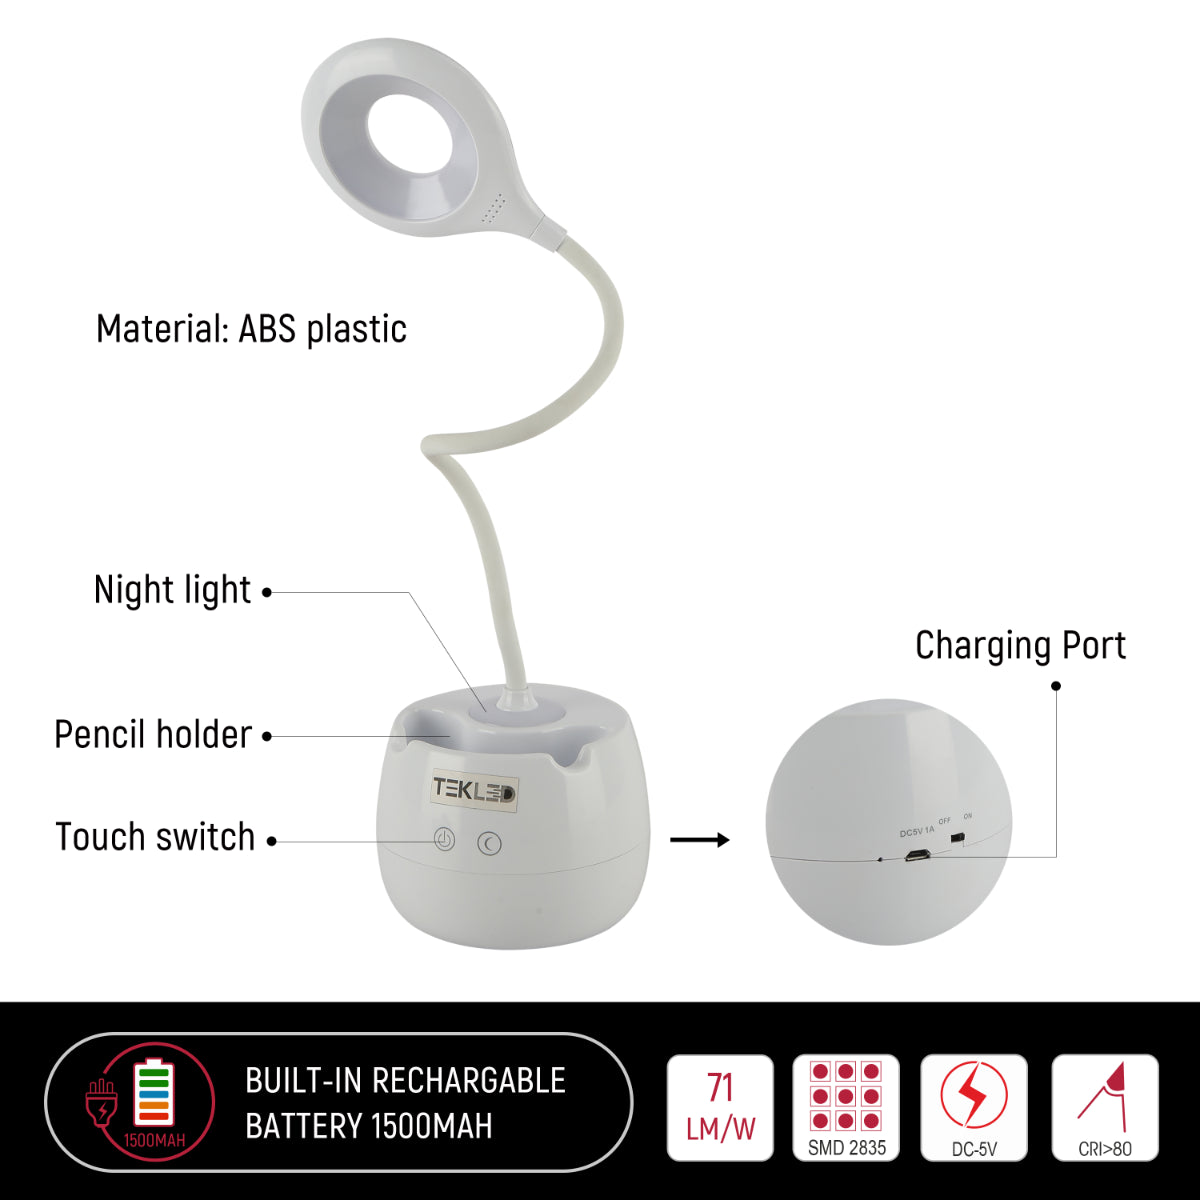 Technical specs of Multifunctional Rechargeable LED Ring Desk Lamp with Pencil Holder 130-03760